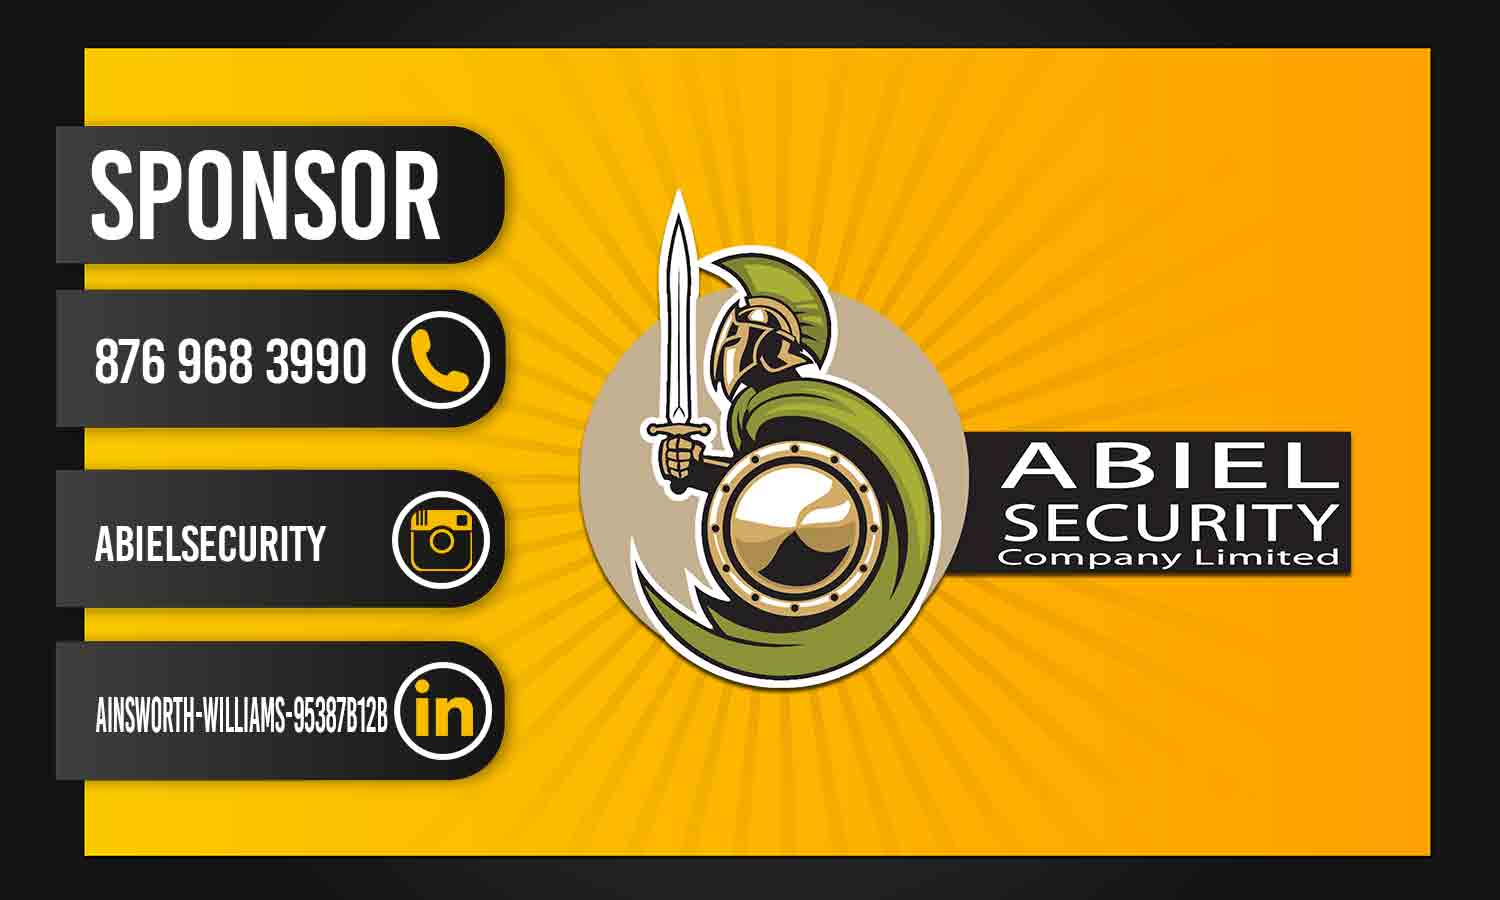 Abiel Security Company Limited